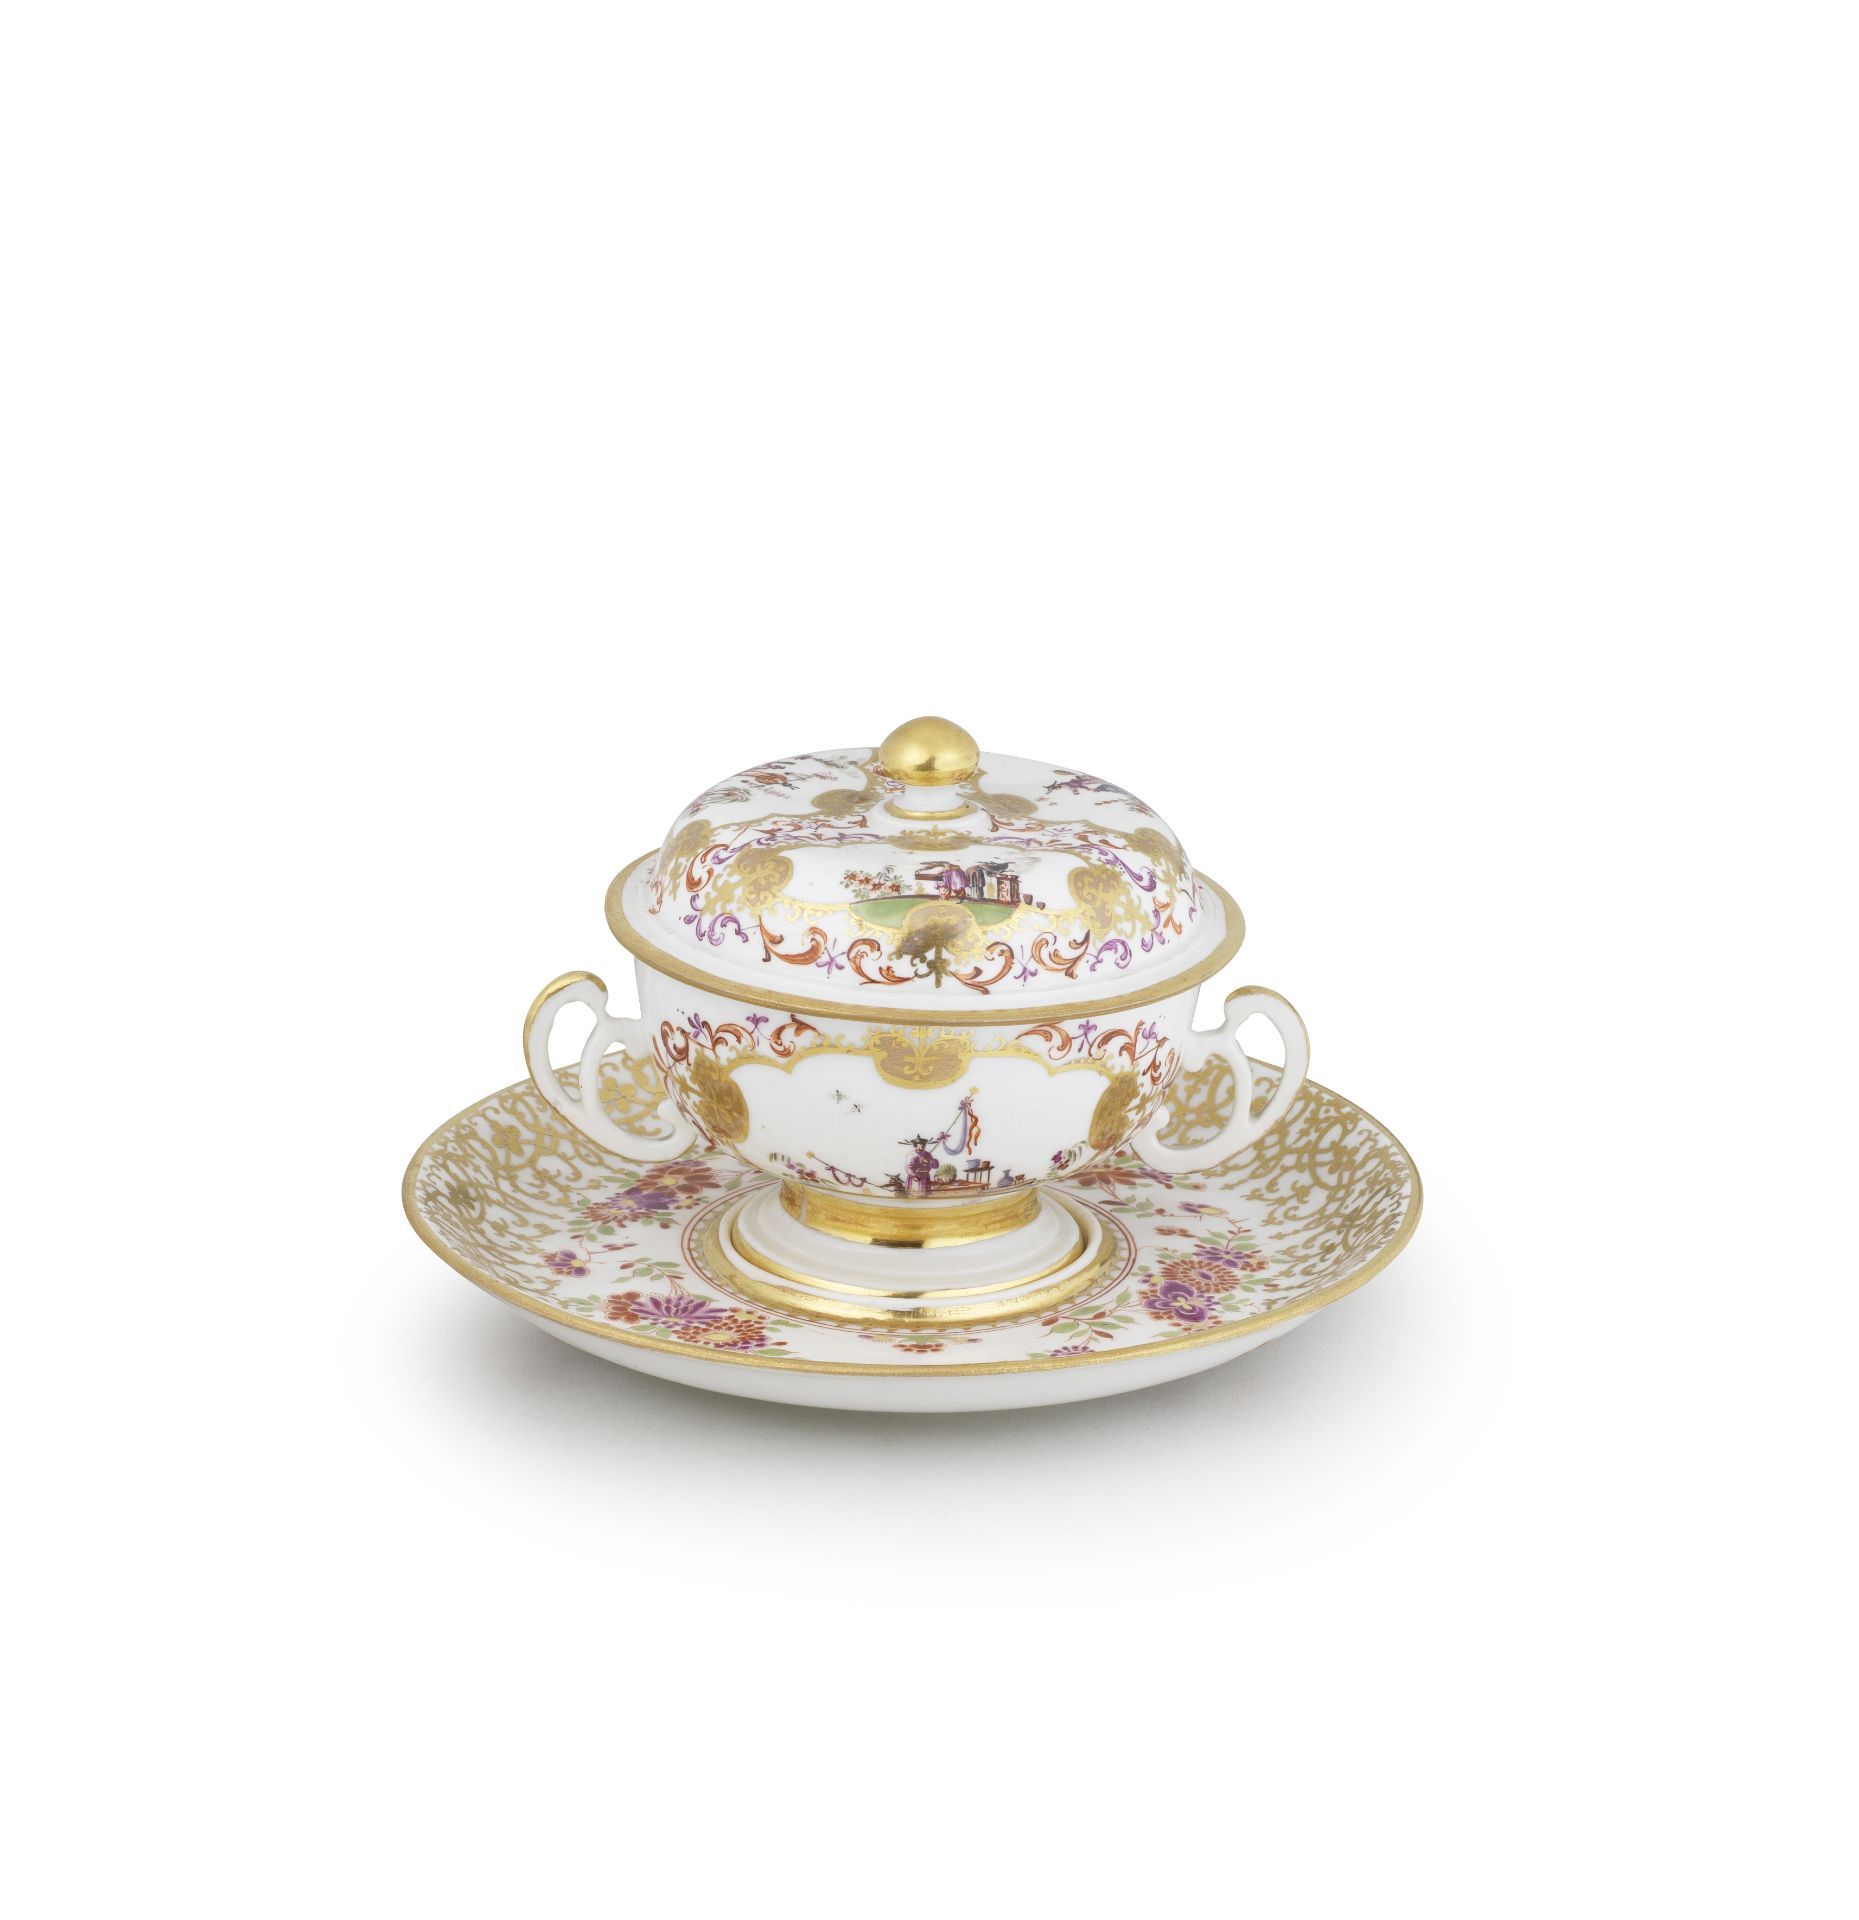 A Meissen two-handled bowl, cover and stand, circa 1725